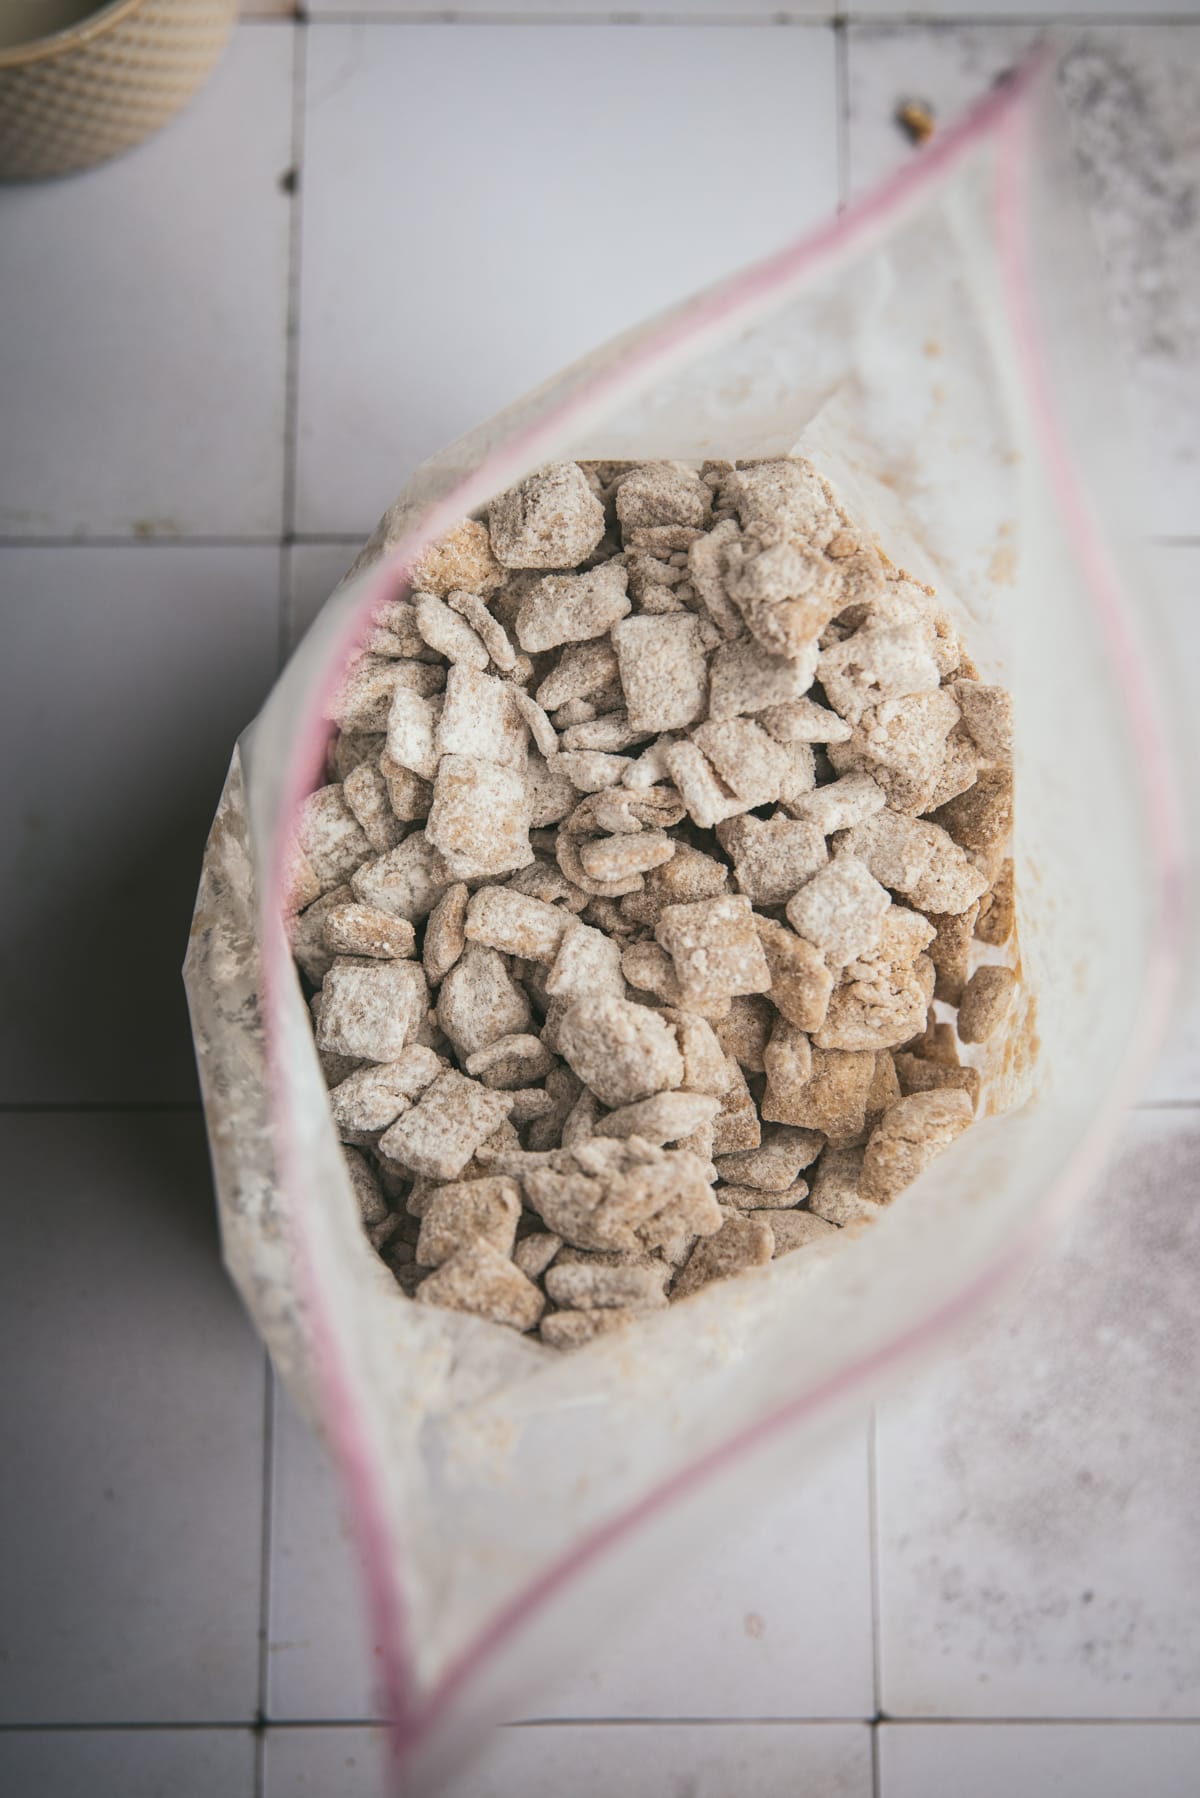 Overhead image of the finished puppy chow inside the plastic zip bag.  It has been coated with the powdered sugar and has a light brown color dusted with white powdered sugar.